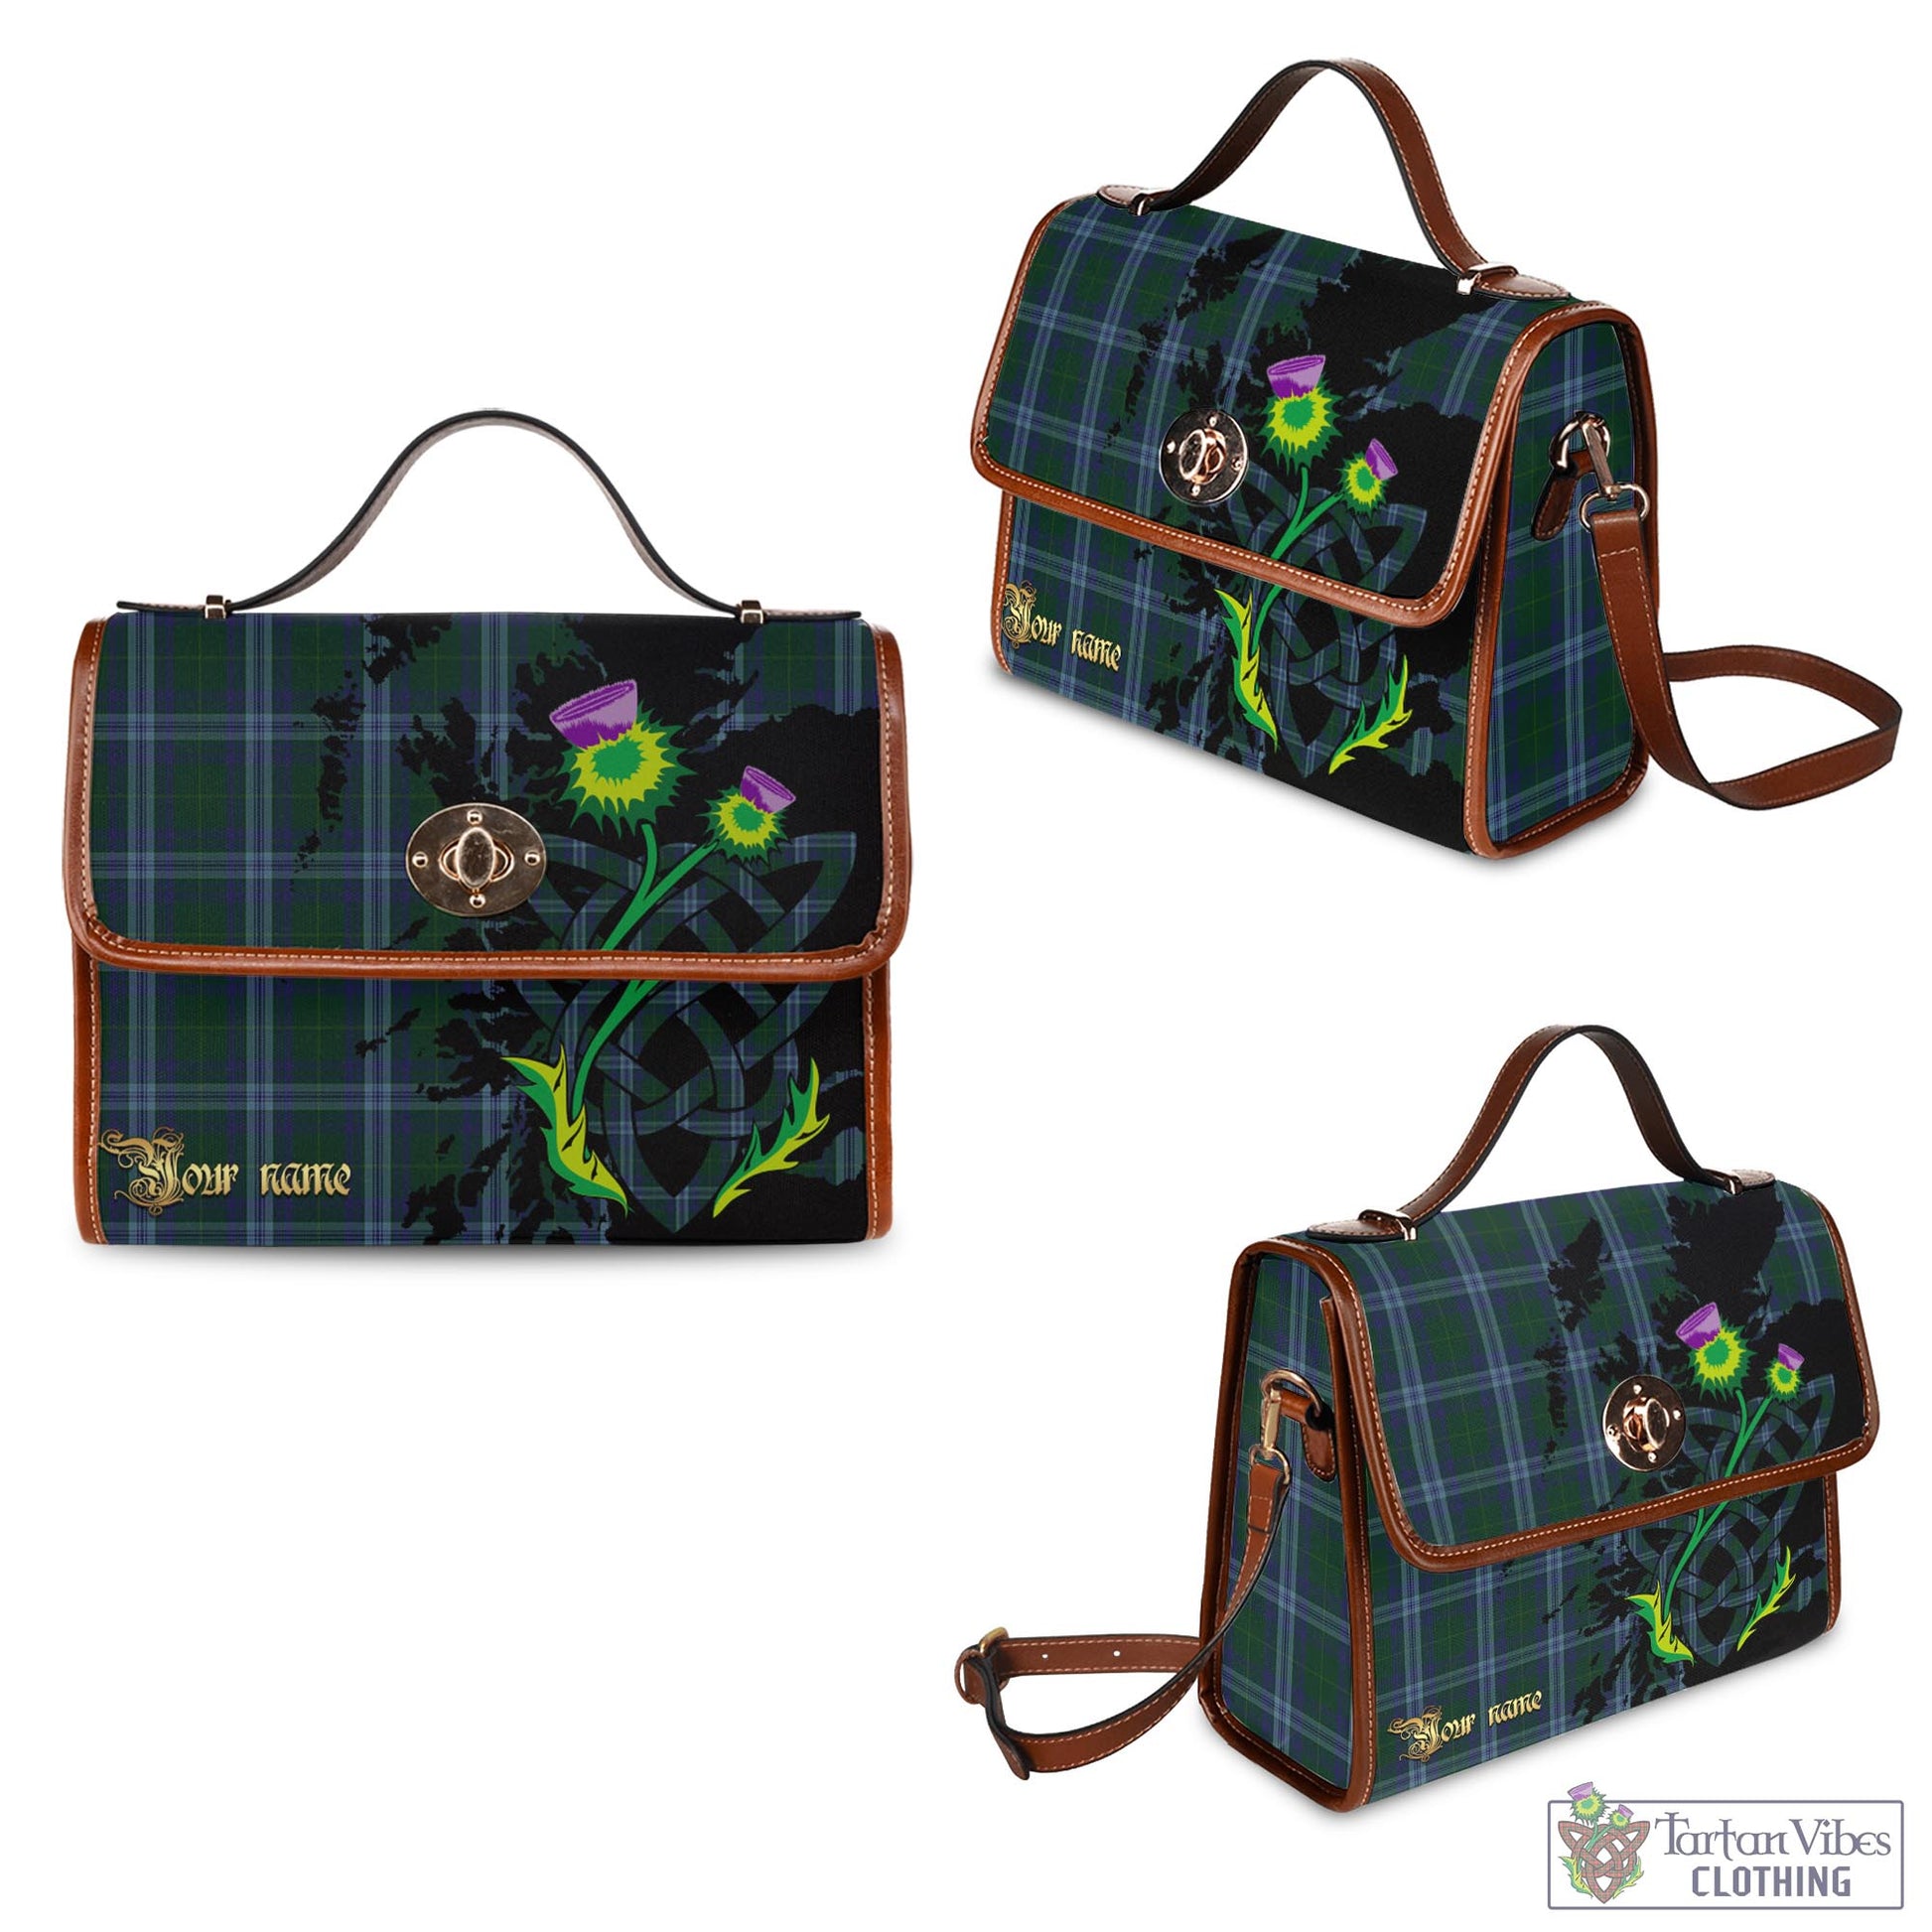 Tartan Vibes Clothing Jones of Wales Tartan Waterproof Canvas Bag with Scotland Map and Thistle Celtic Accents